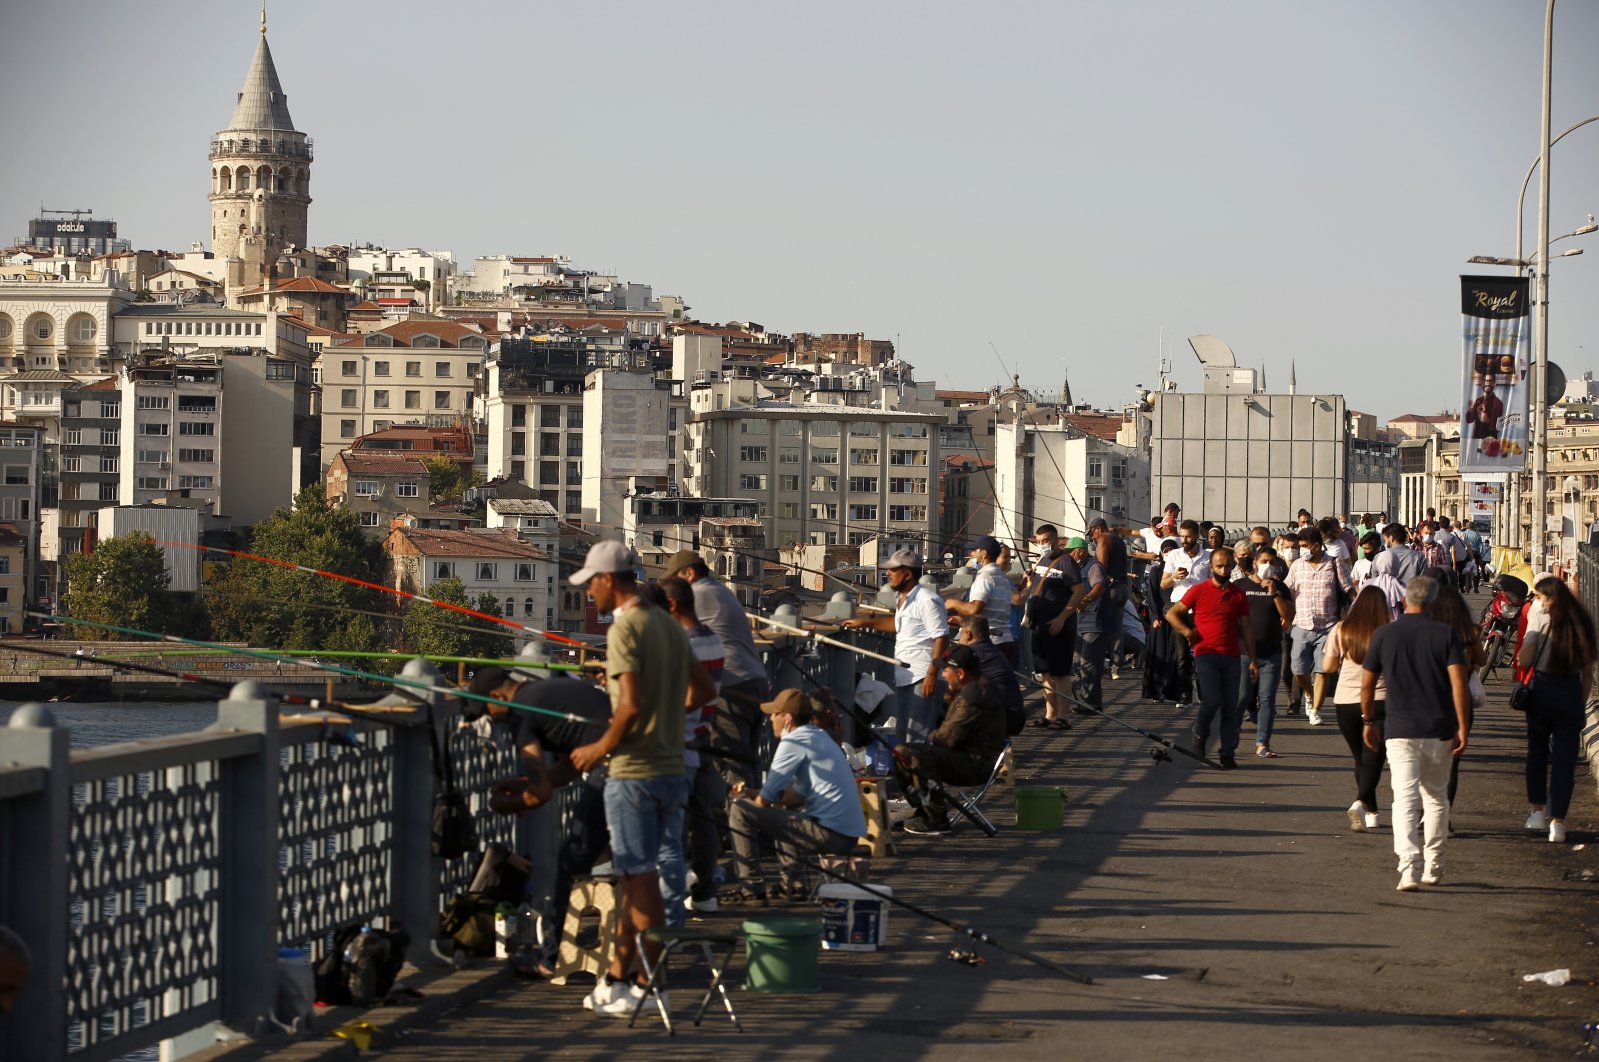 People walk along the Galata Bridge, with the historical Galata Tower in the background, in Istanbul, Turkey, Aug. 7, 2020. (AP Photo)